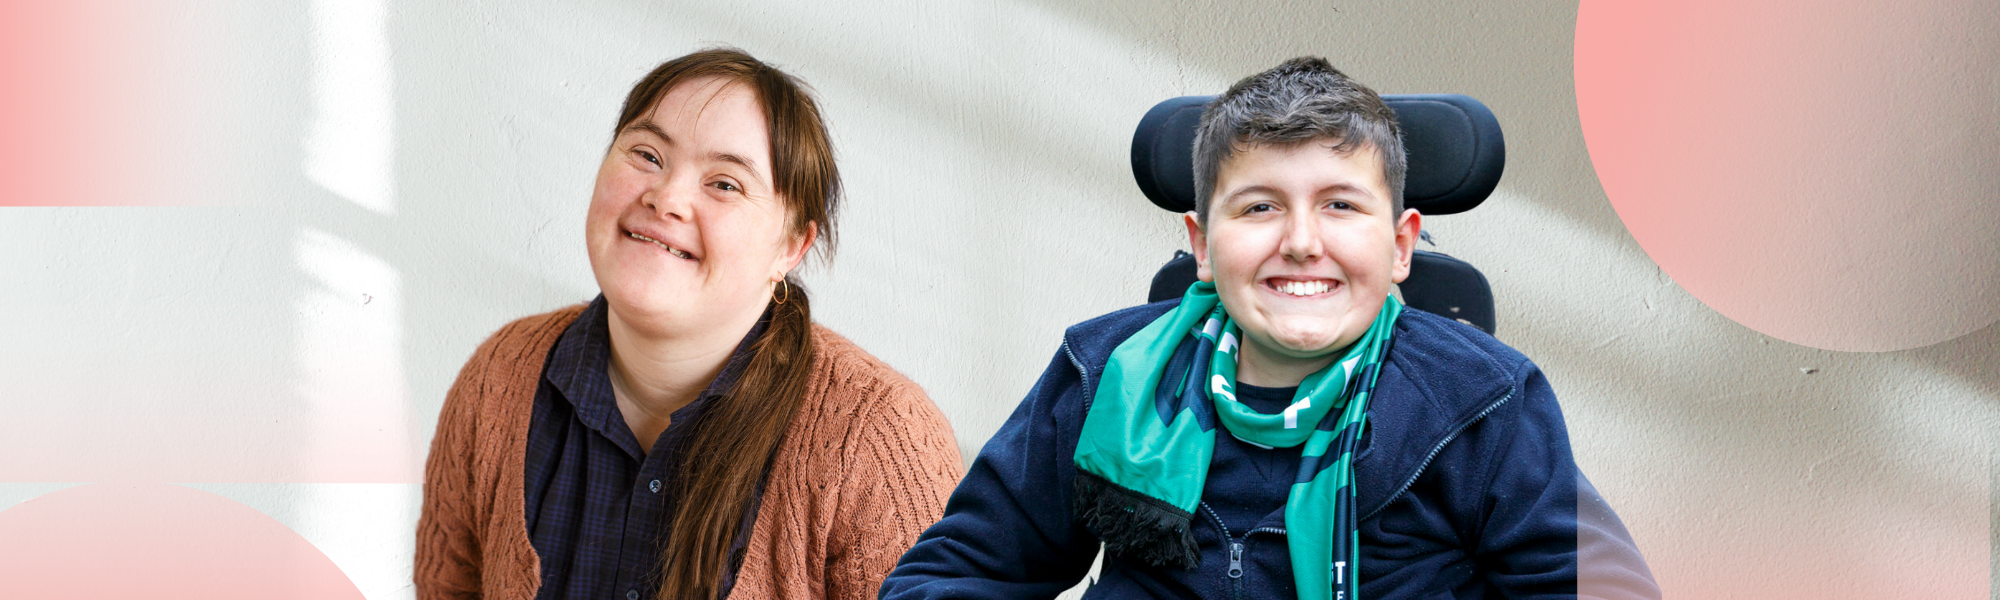 Learn more about how you can support Yooralla to make a difference to the lives of people with disability